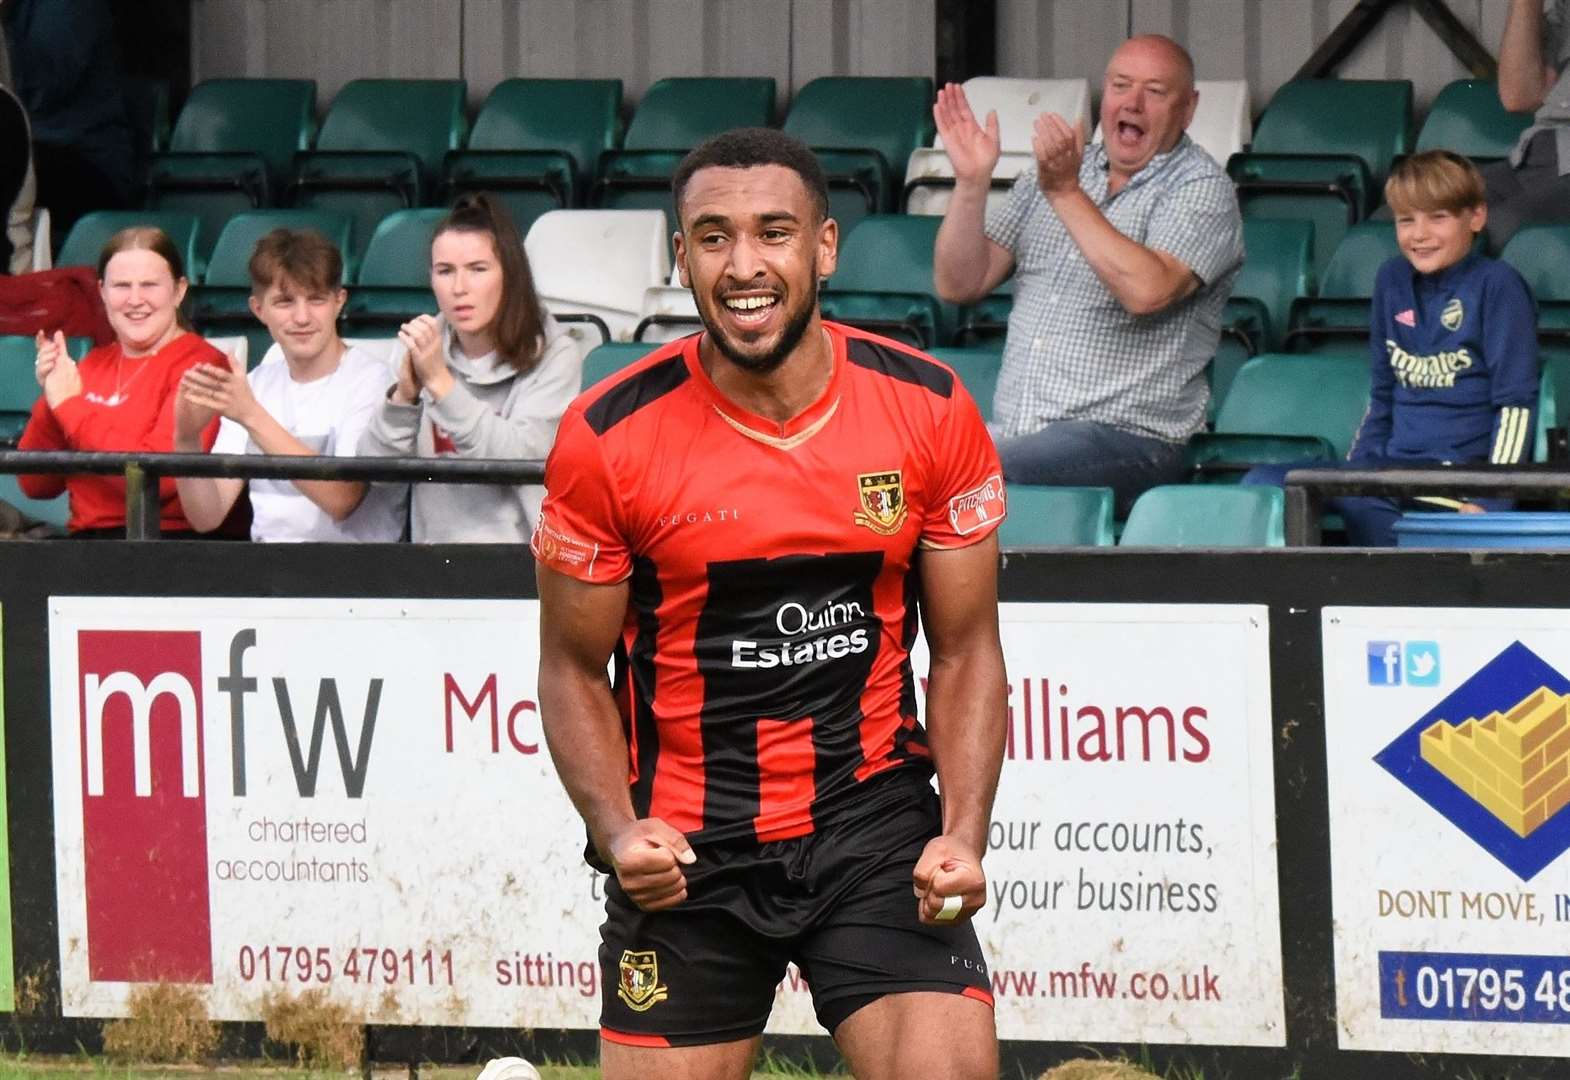 Johan Caney-Bryan celebrates scoring for Sittingbourne against Littlehampton Town in the FA Cup on Saturday. The teams meet again in a midweek replay. Picture: Ken Medwyn